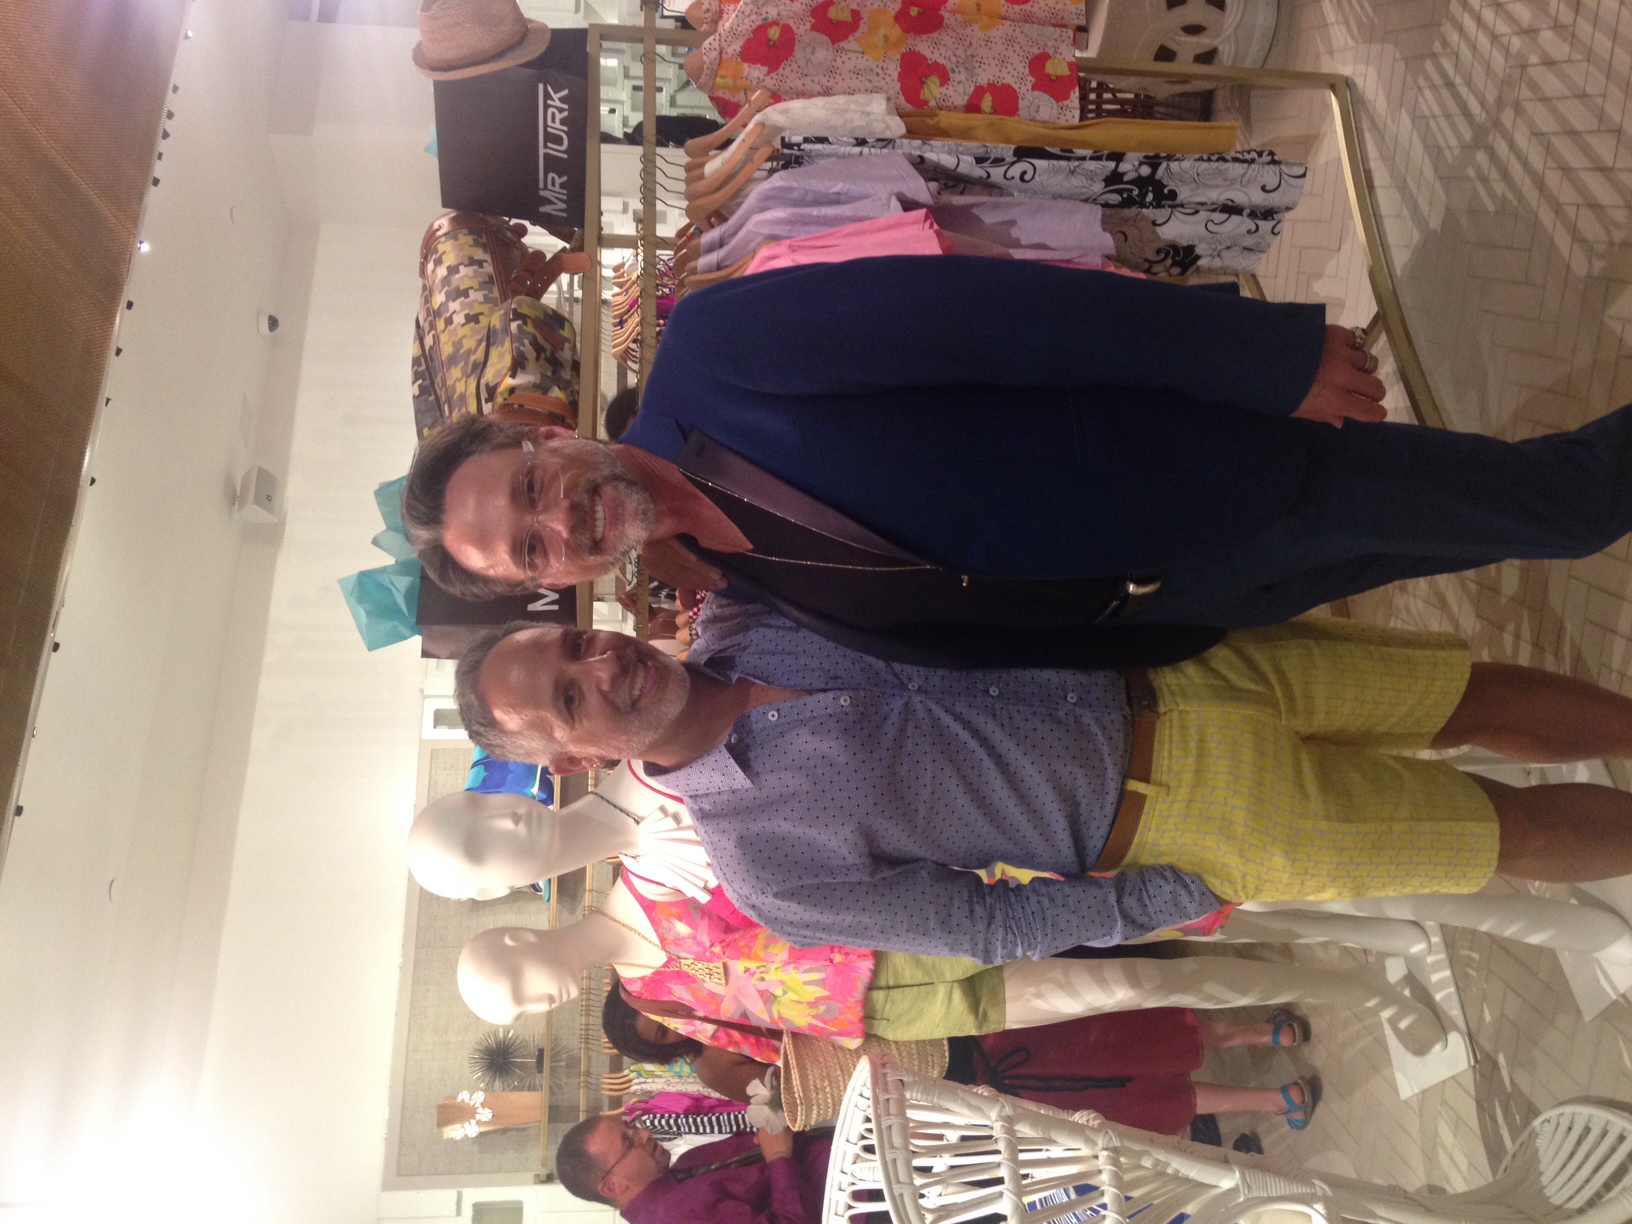  Mr Turk found a new friend with Steve Hightower, one of the most prominent stylists in Atlanta. 